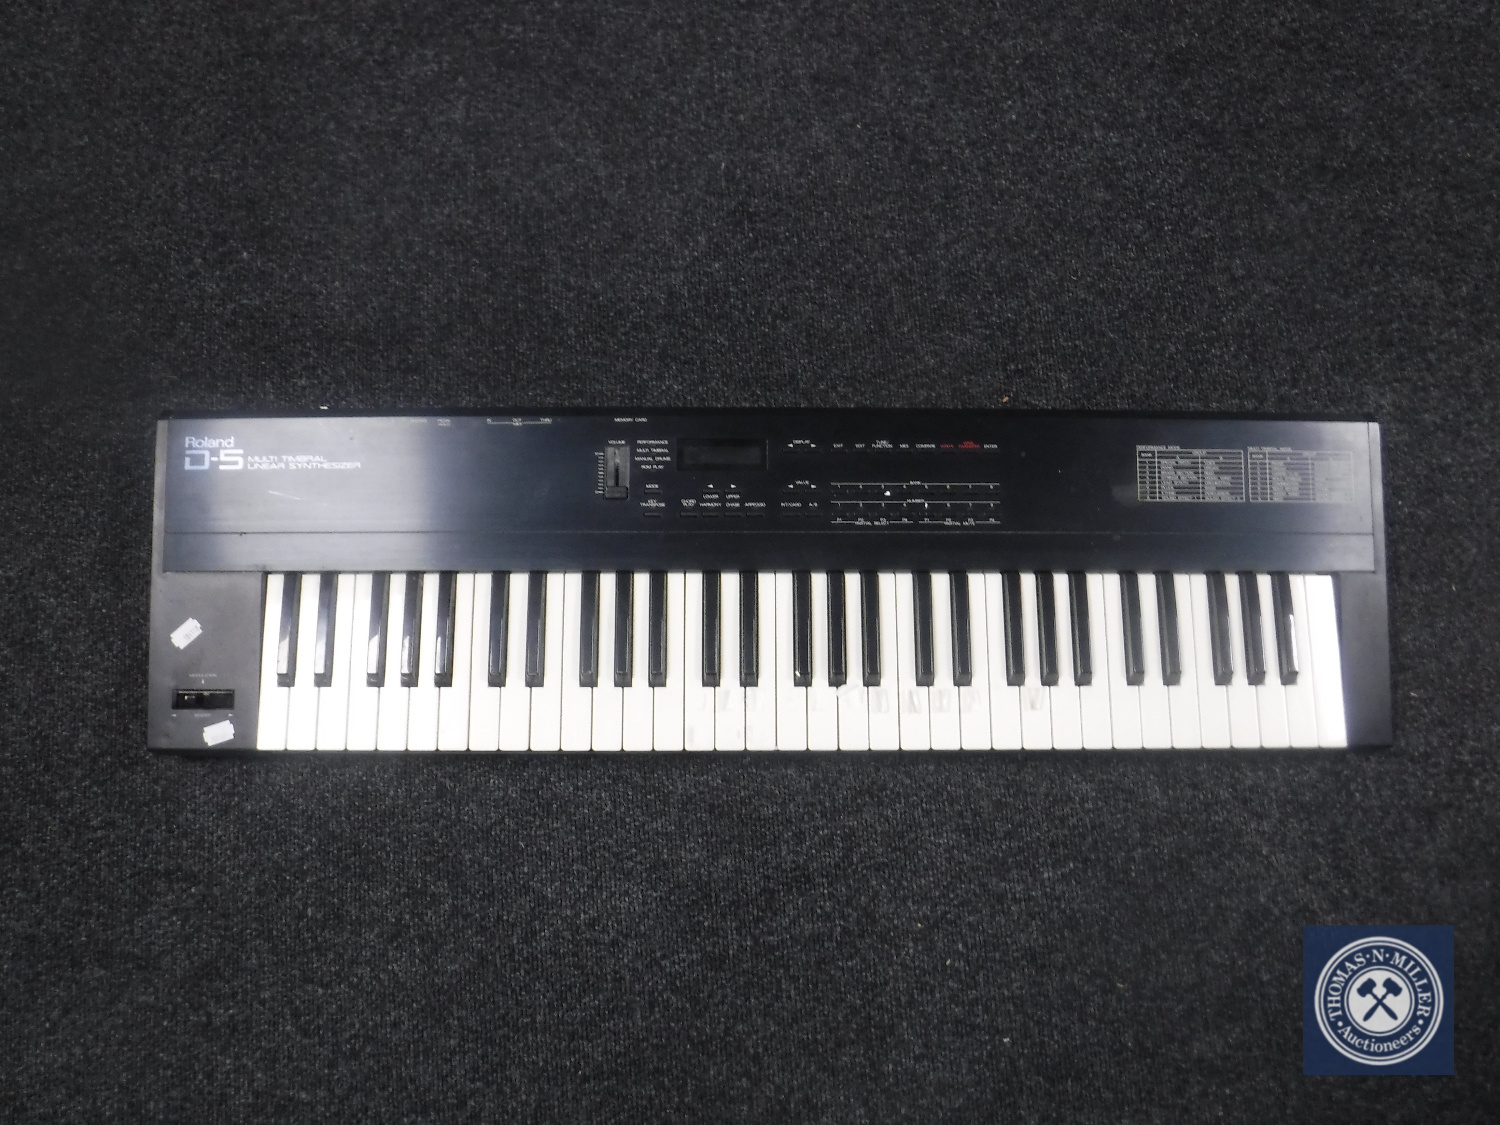 A Roland D5 multi timbral linear synthesizer